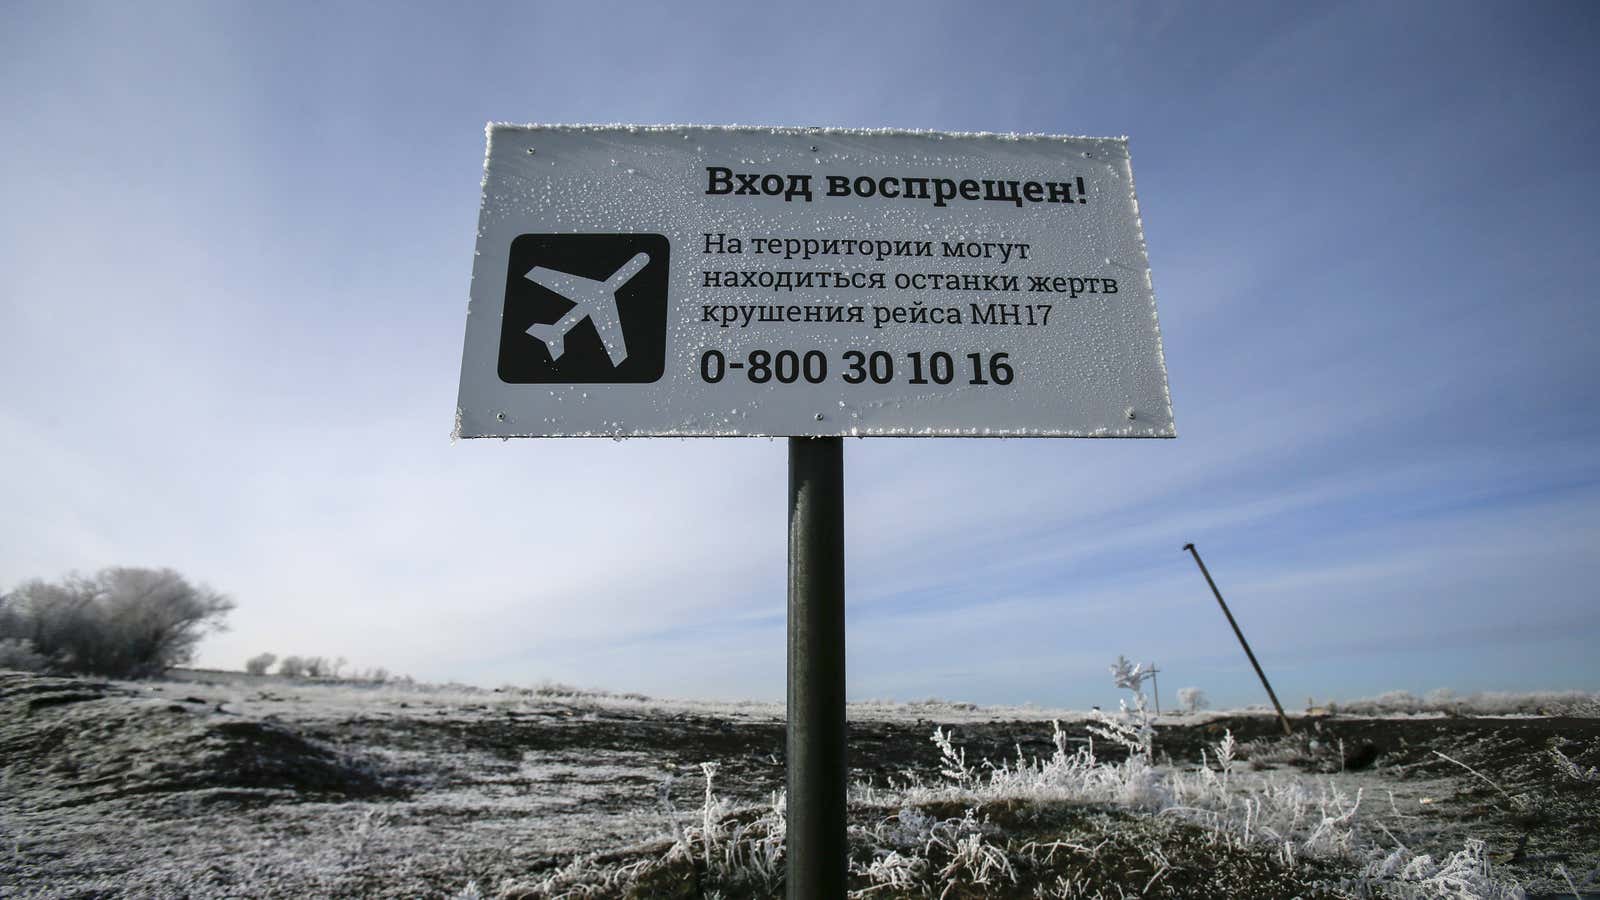 “No entrance! There may be remains of the victims of flight MH17 crash at the territory”.